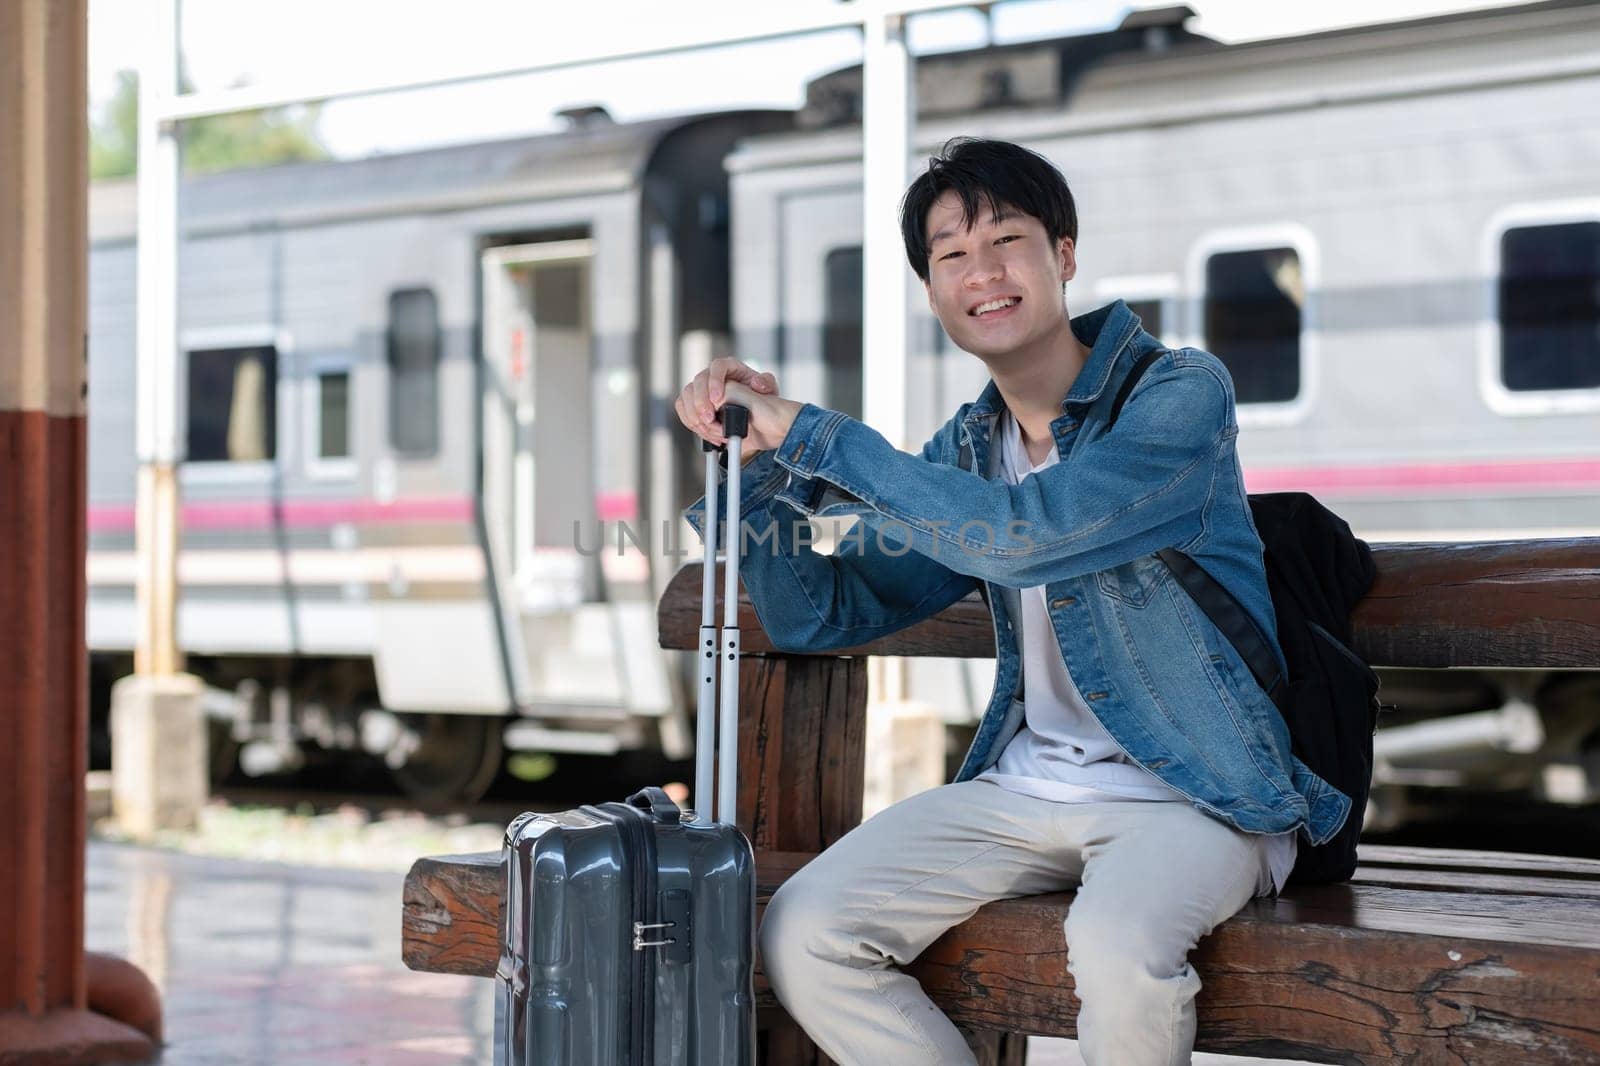 A young man holding a suitcase waits for a train at the train station for traveling. by wichayada